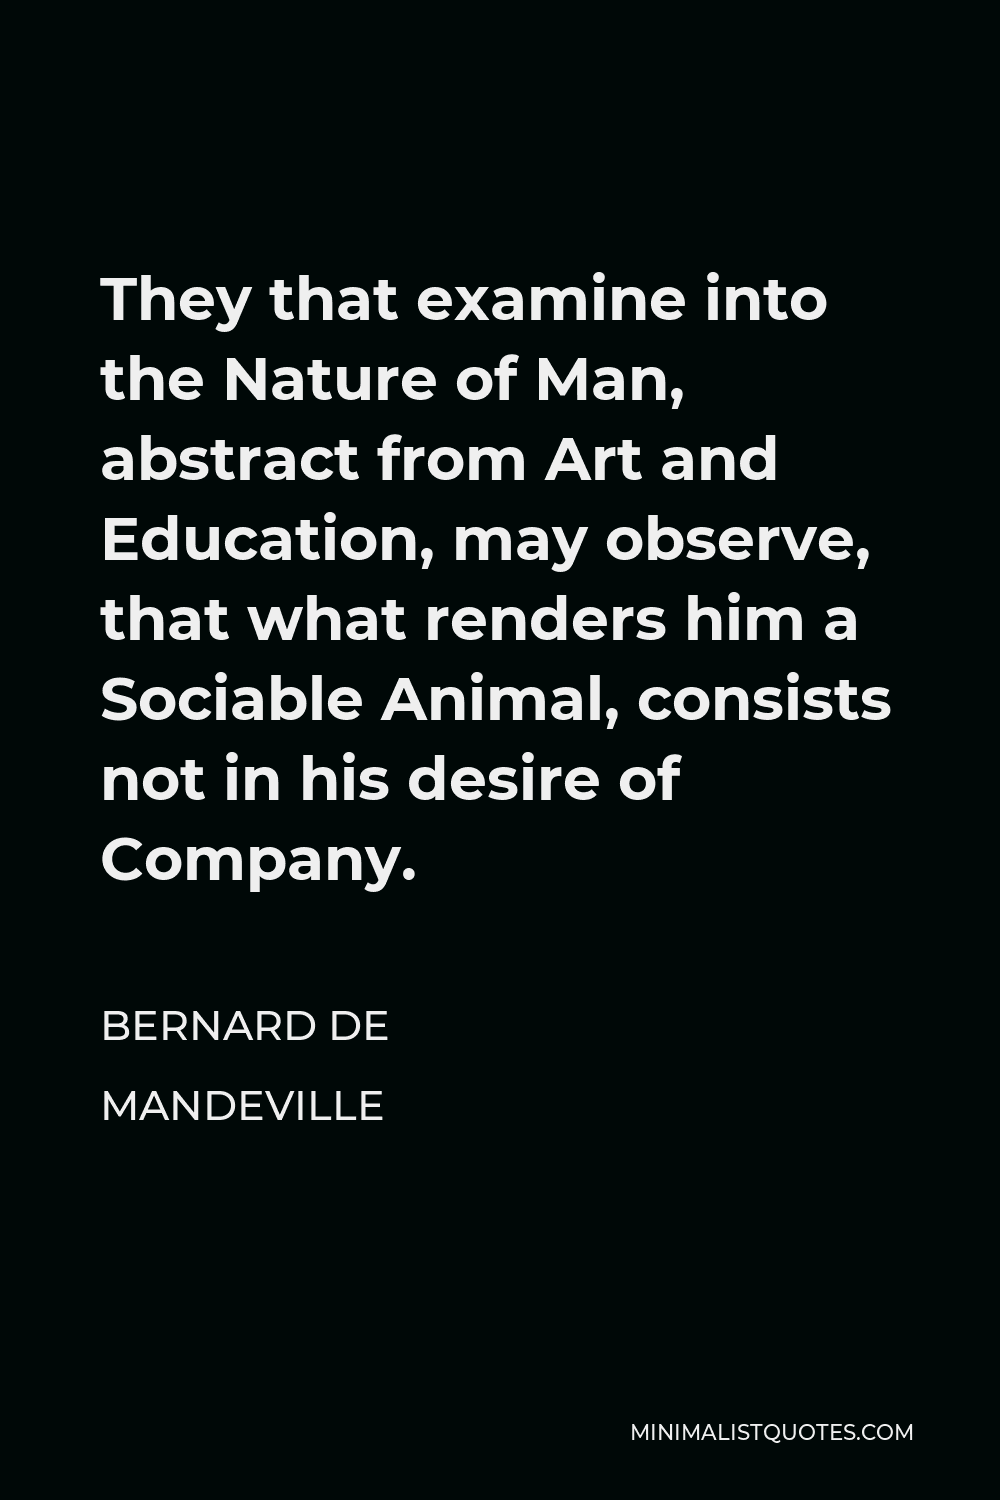 Bernard de Mandeville Quote - They that examine into the Nature of Man, abstract from Art and Education, may observe, that what renders him a Sociable Animal, consists not in his desire of Company.